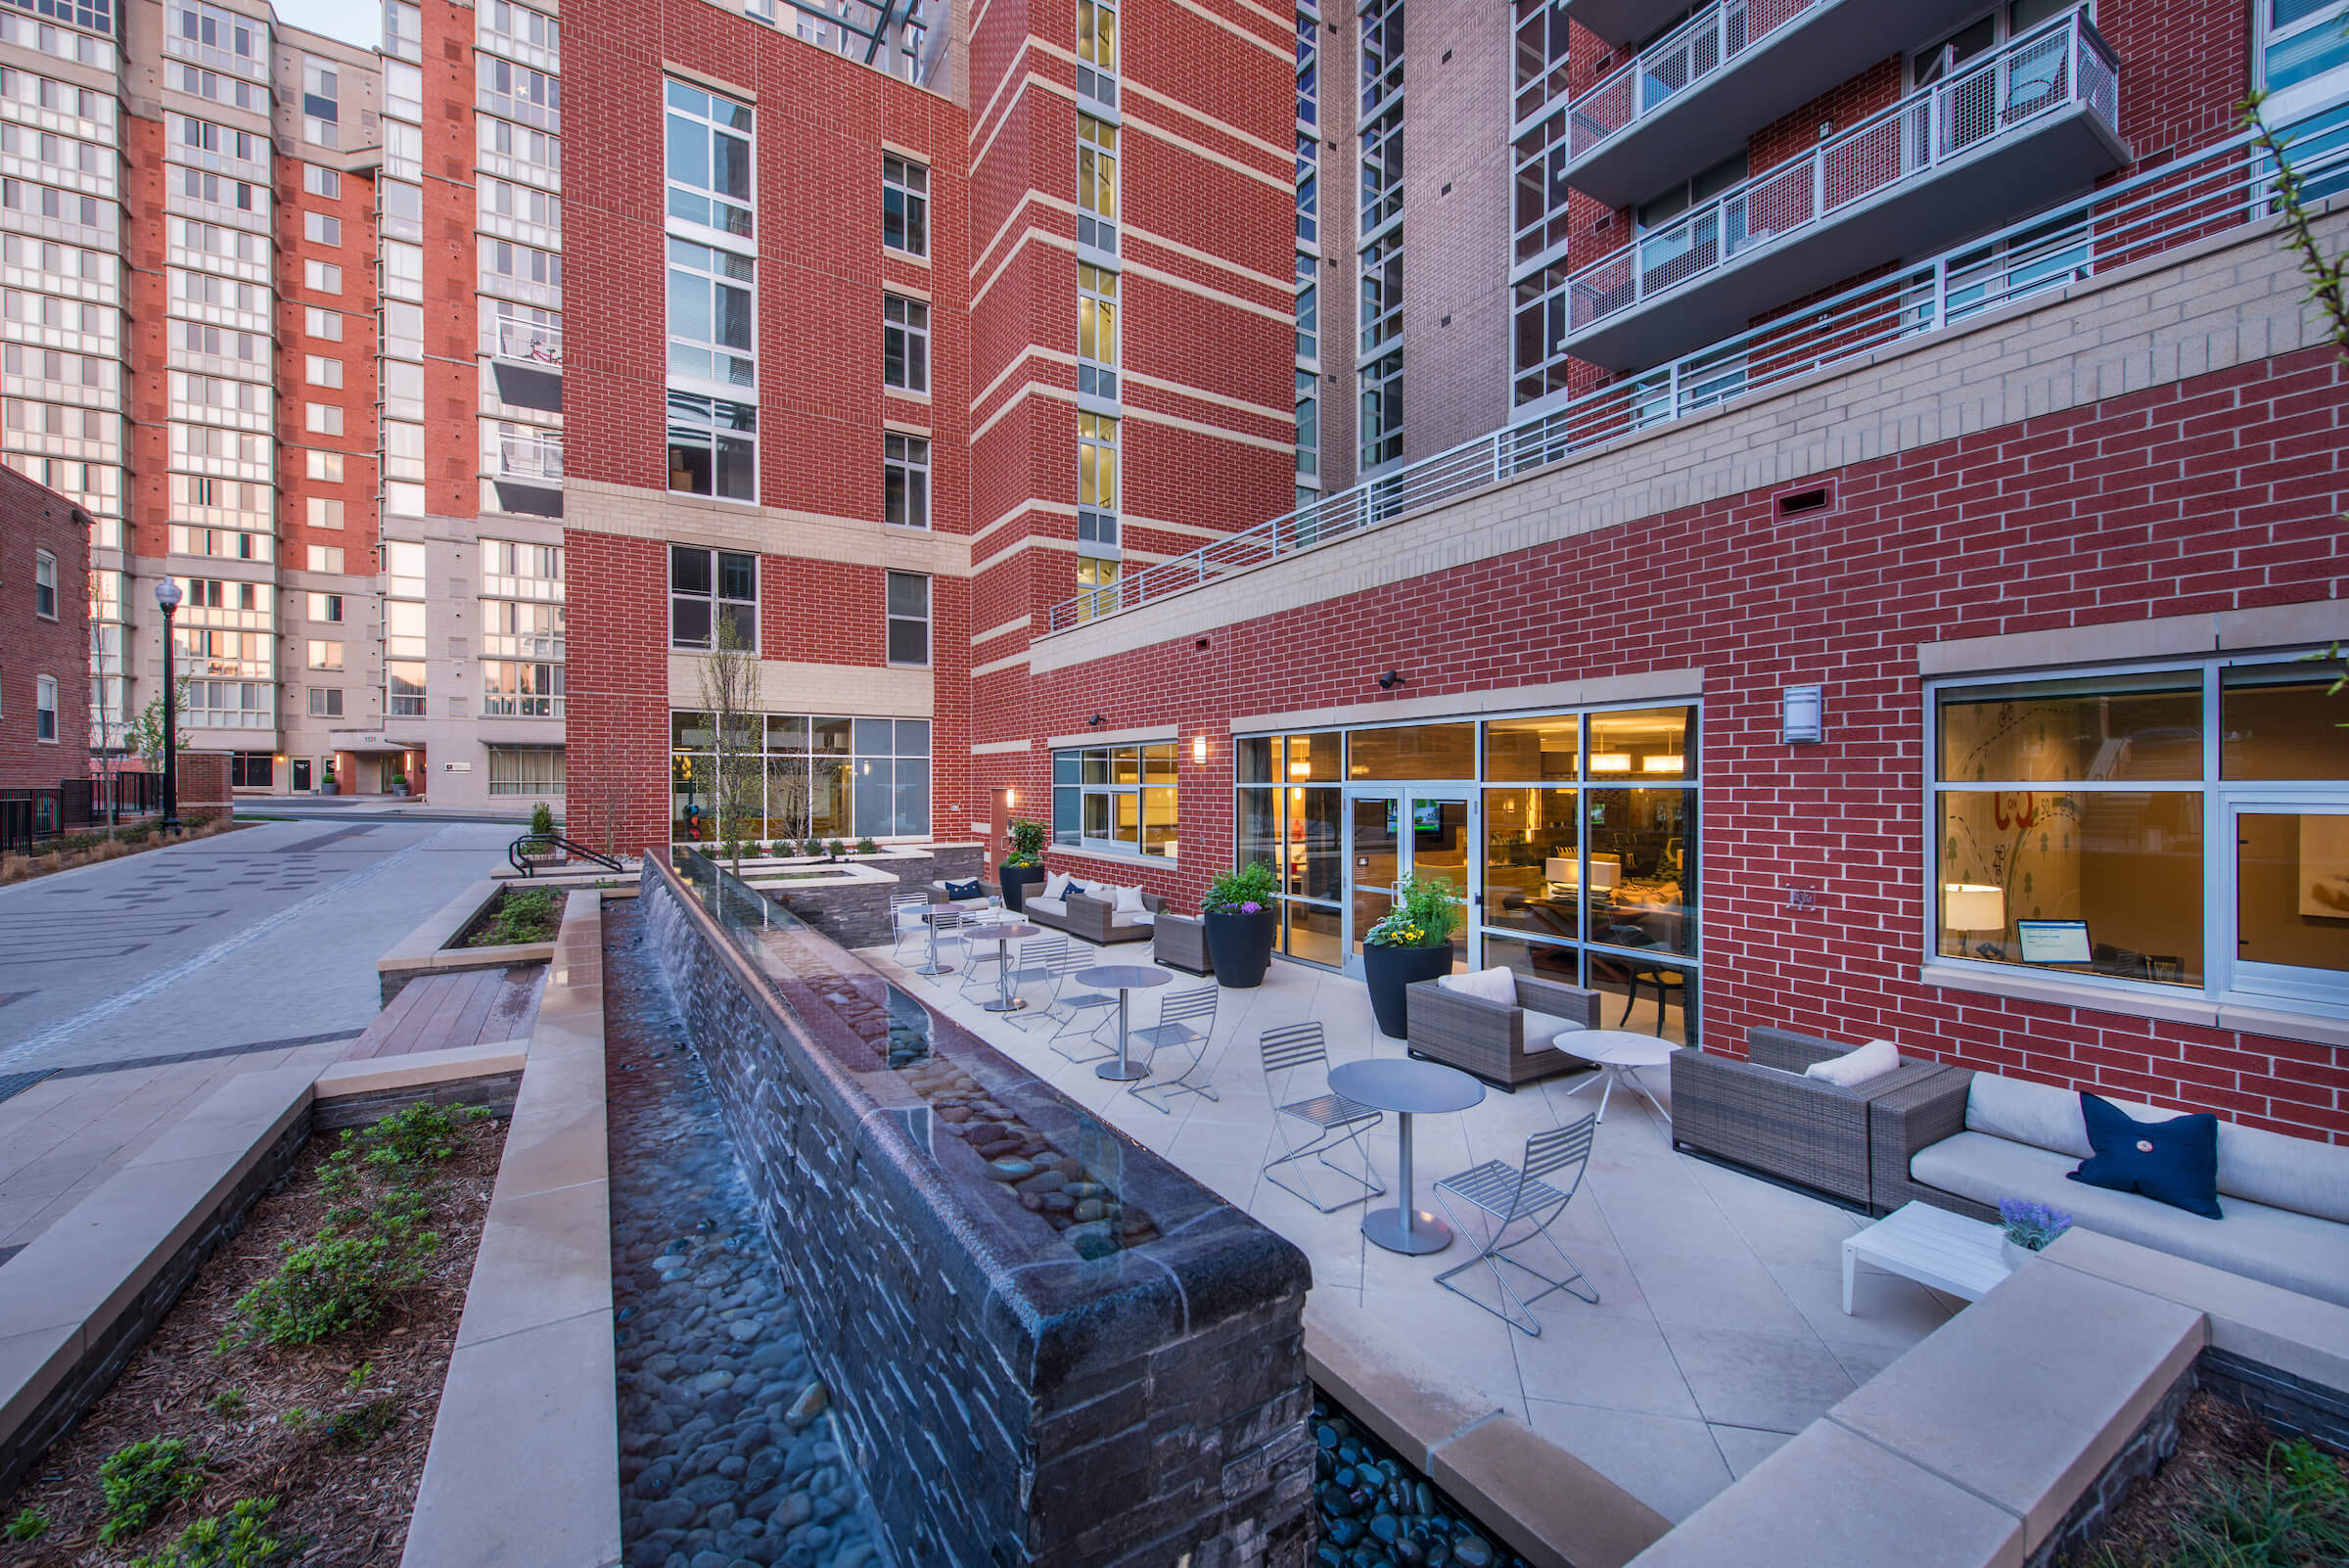 Enjoy a meal, or a meeting from our courtyard.